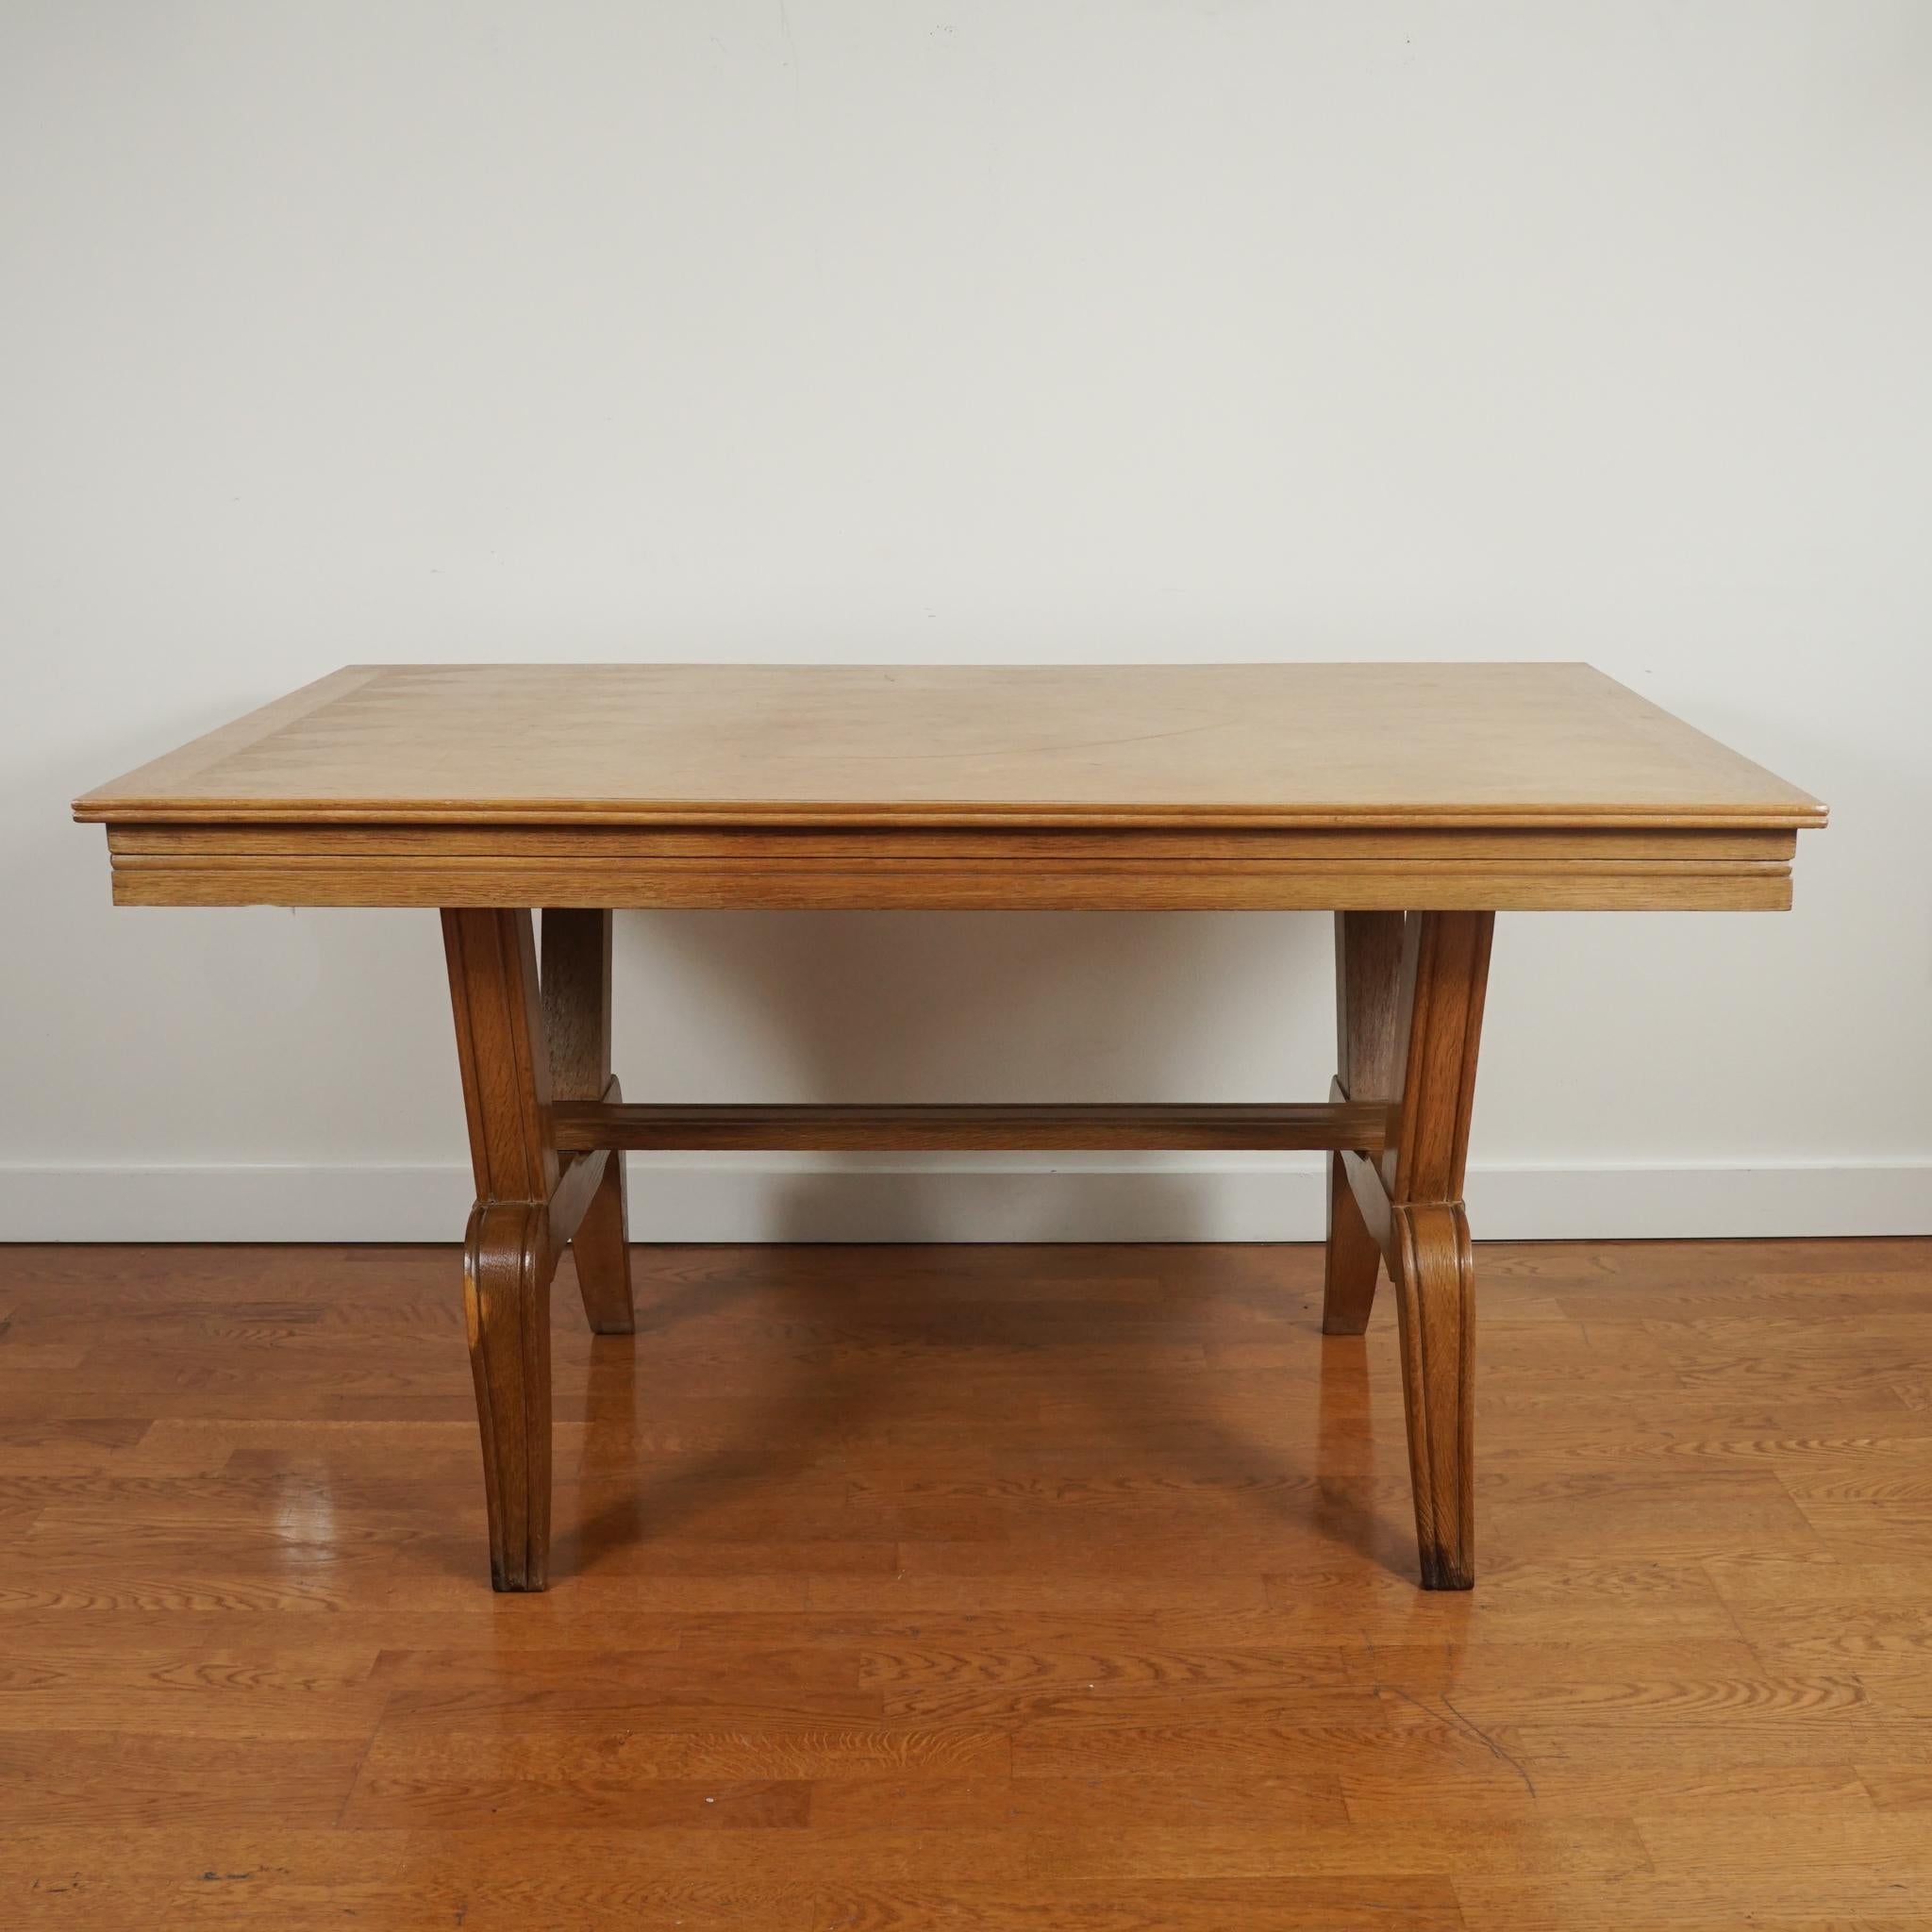 The French oak dining table, shown here, is made of solid oak and features a diamond-patterned veneer top and stylized trestle base with stretcher. Made in the 1950s, it has beautiful aged patina with little only minimal signs of wear. The design